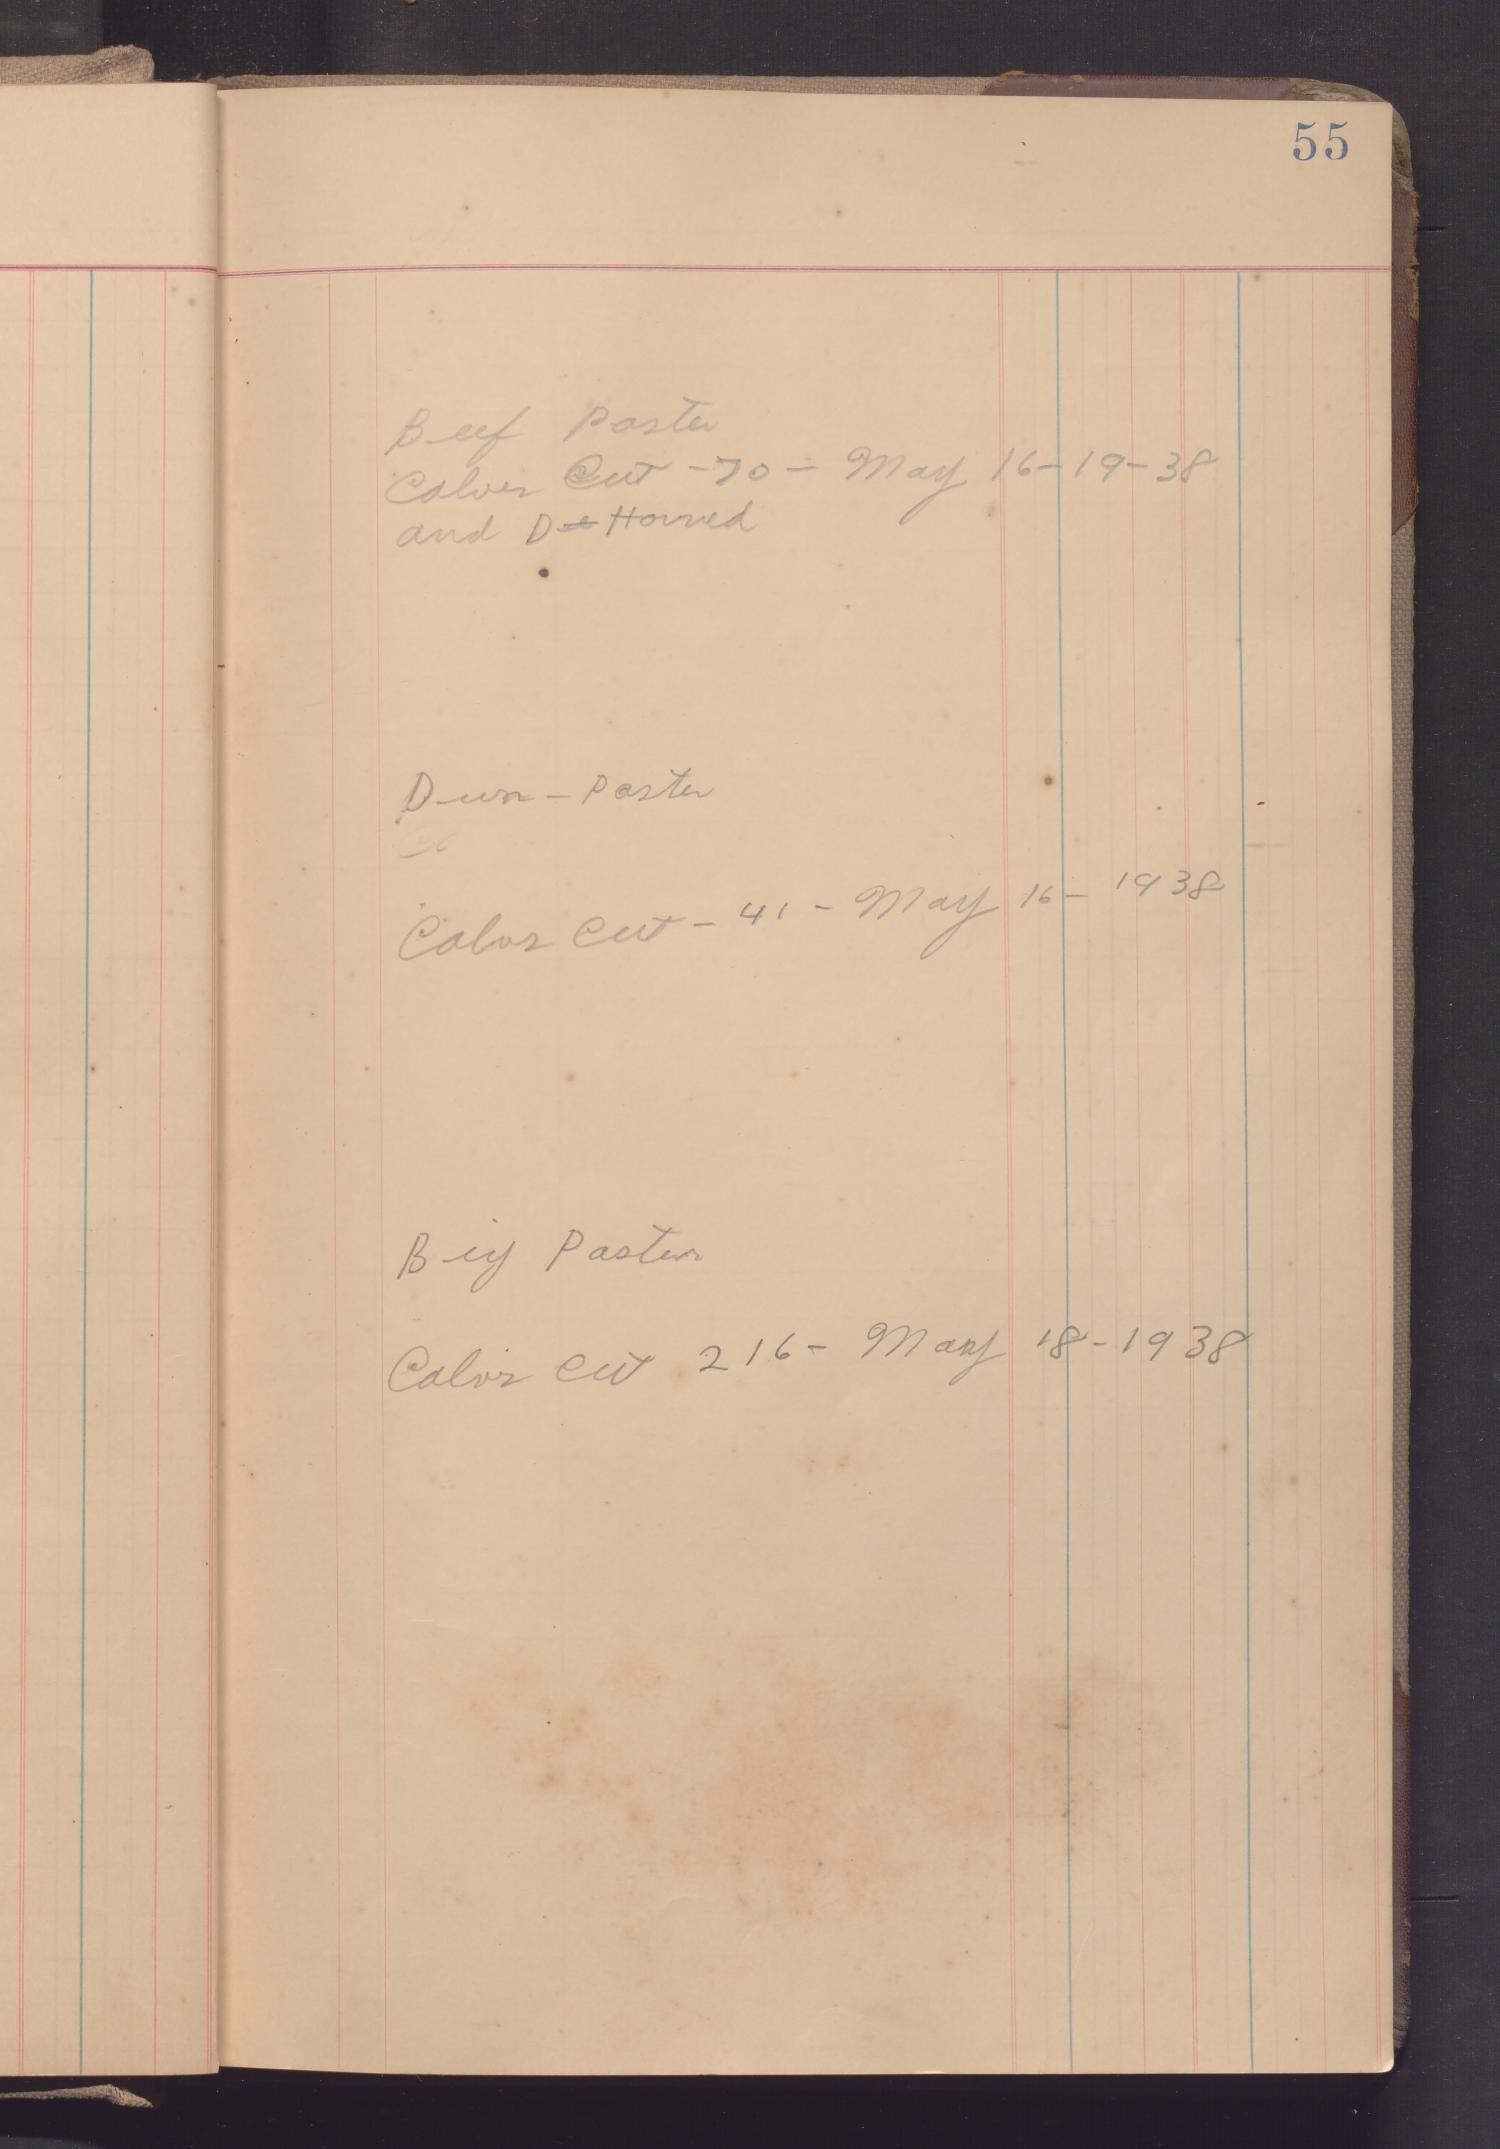 [O'Connor Brothers General Business Ledger: July 1899 - March 1939]
                                                
                                                    55
                                                